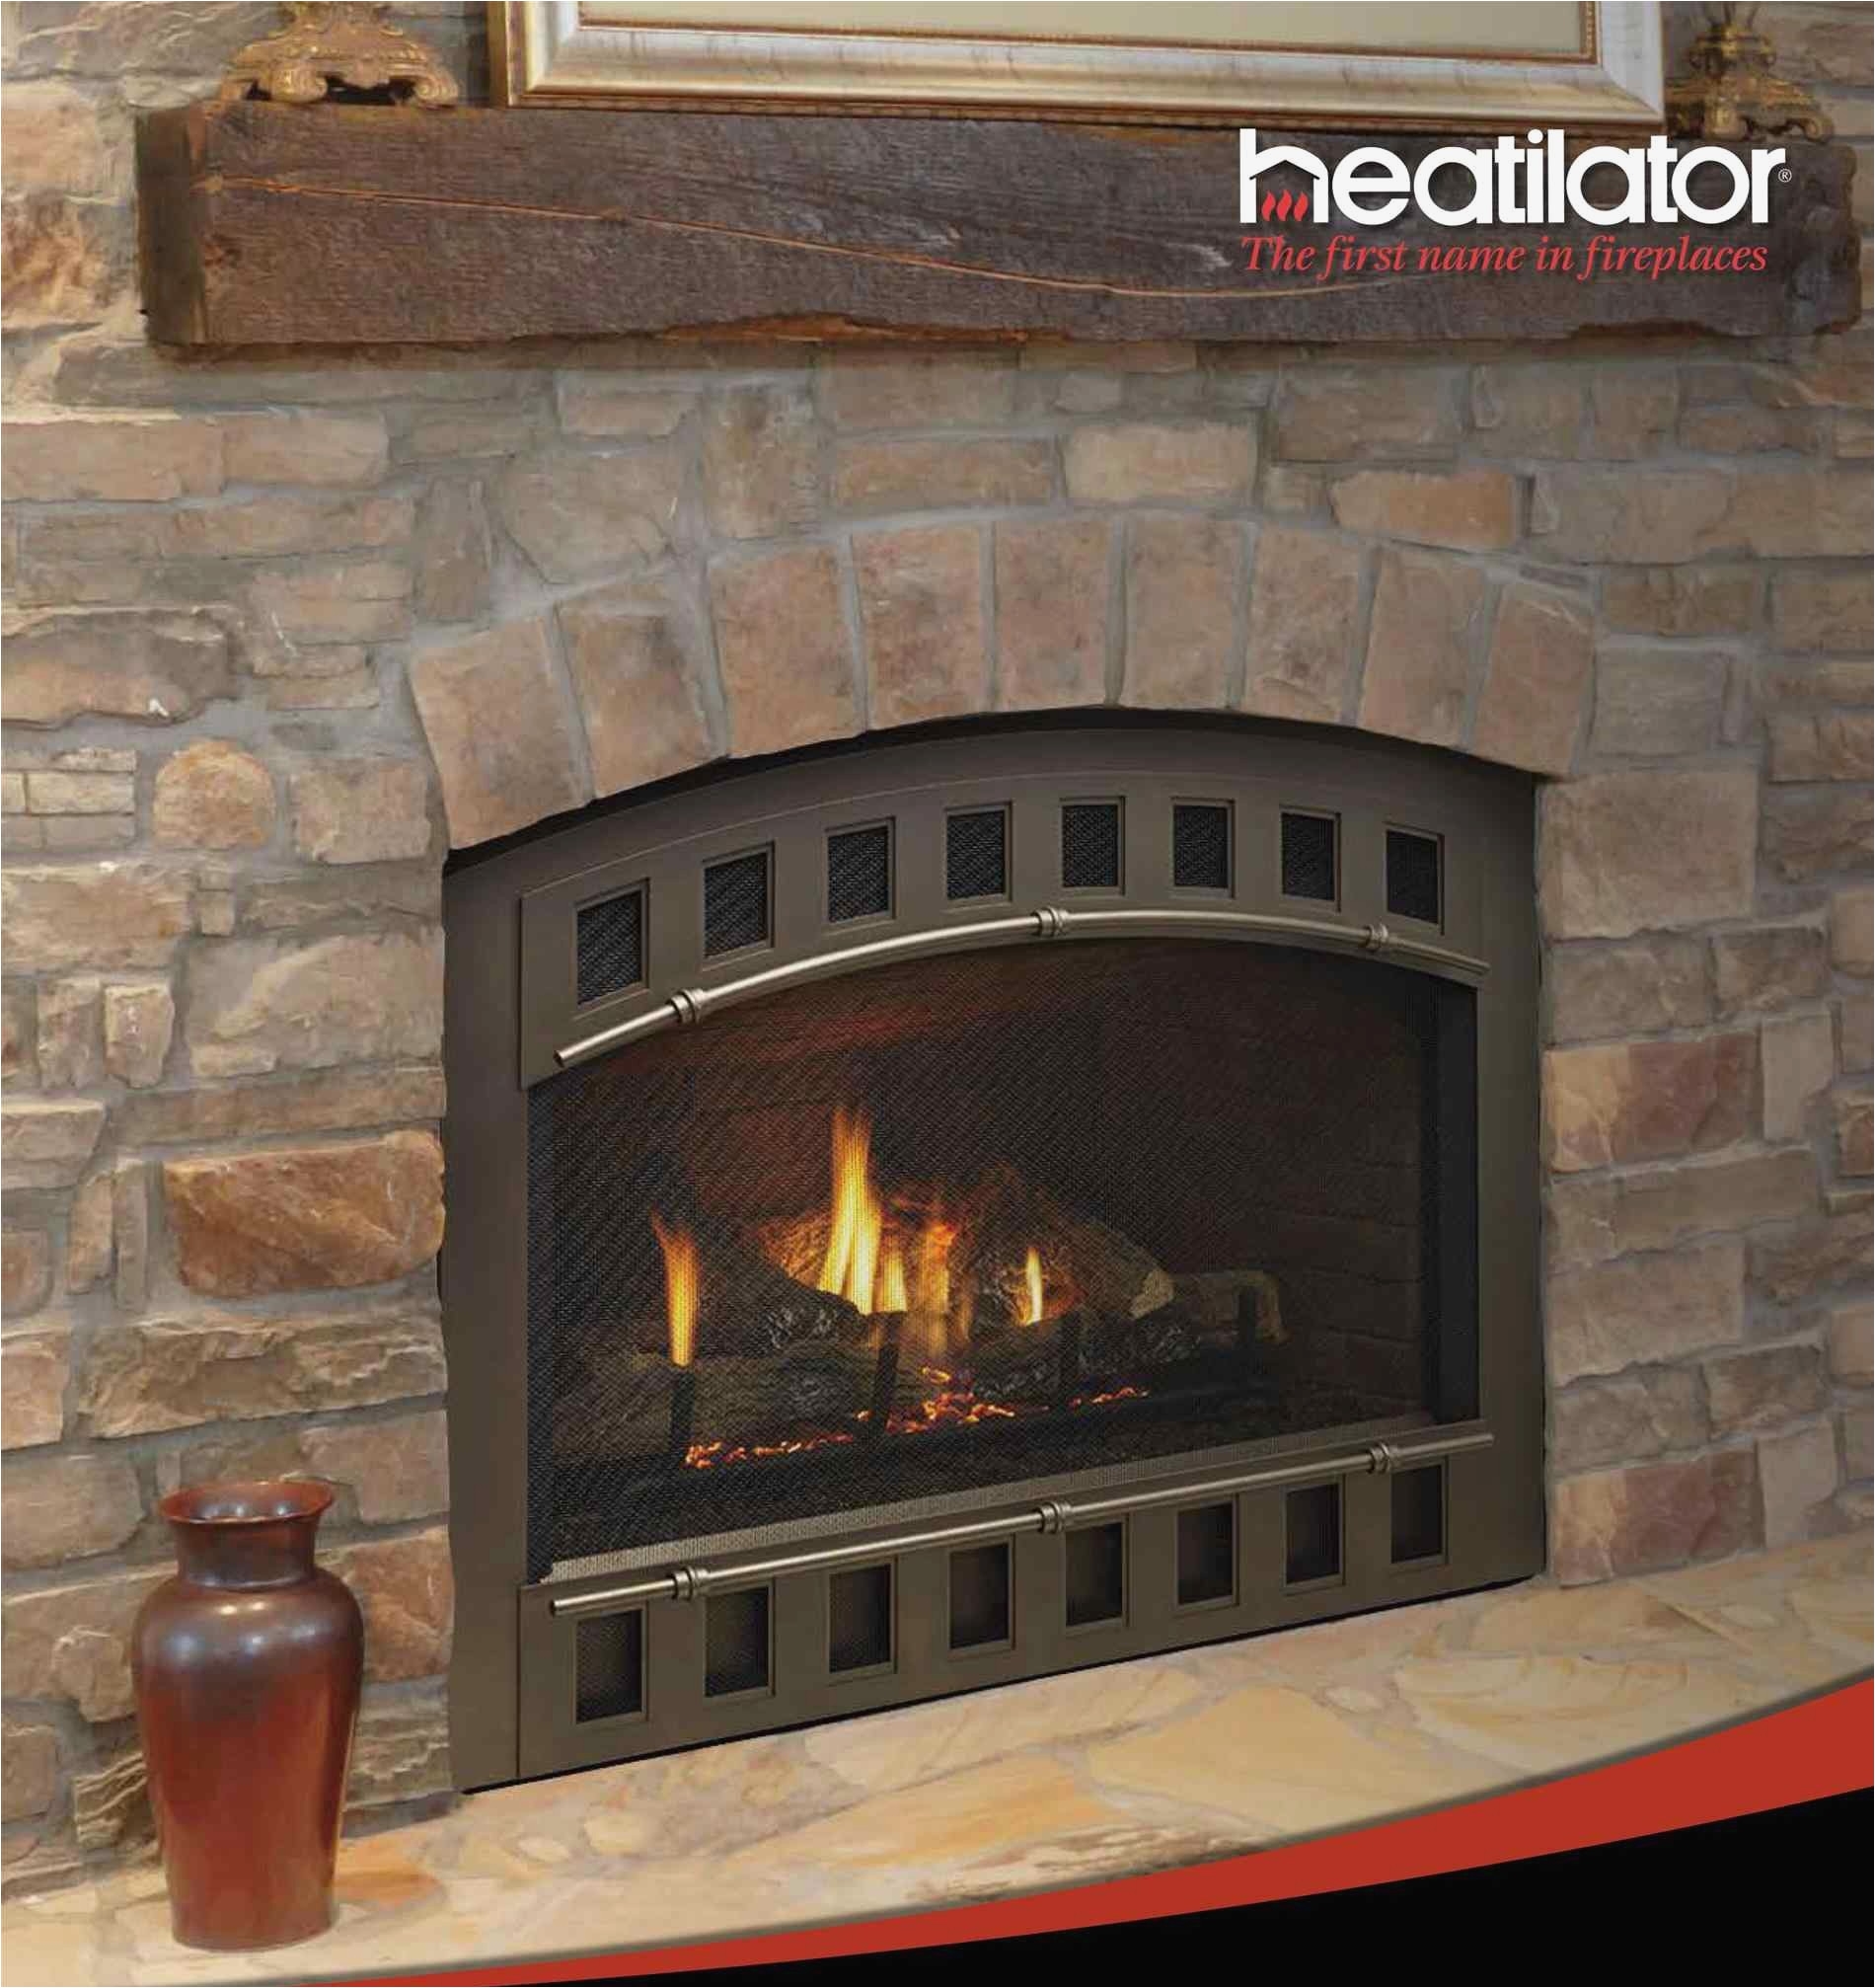 Lennox Gas Fireplace Parts Best Of Lennox Gas Fireplace Parts Tsumi Interior Design